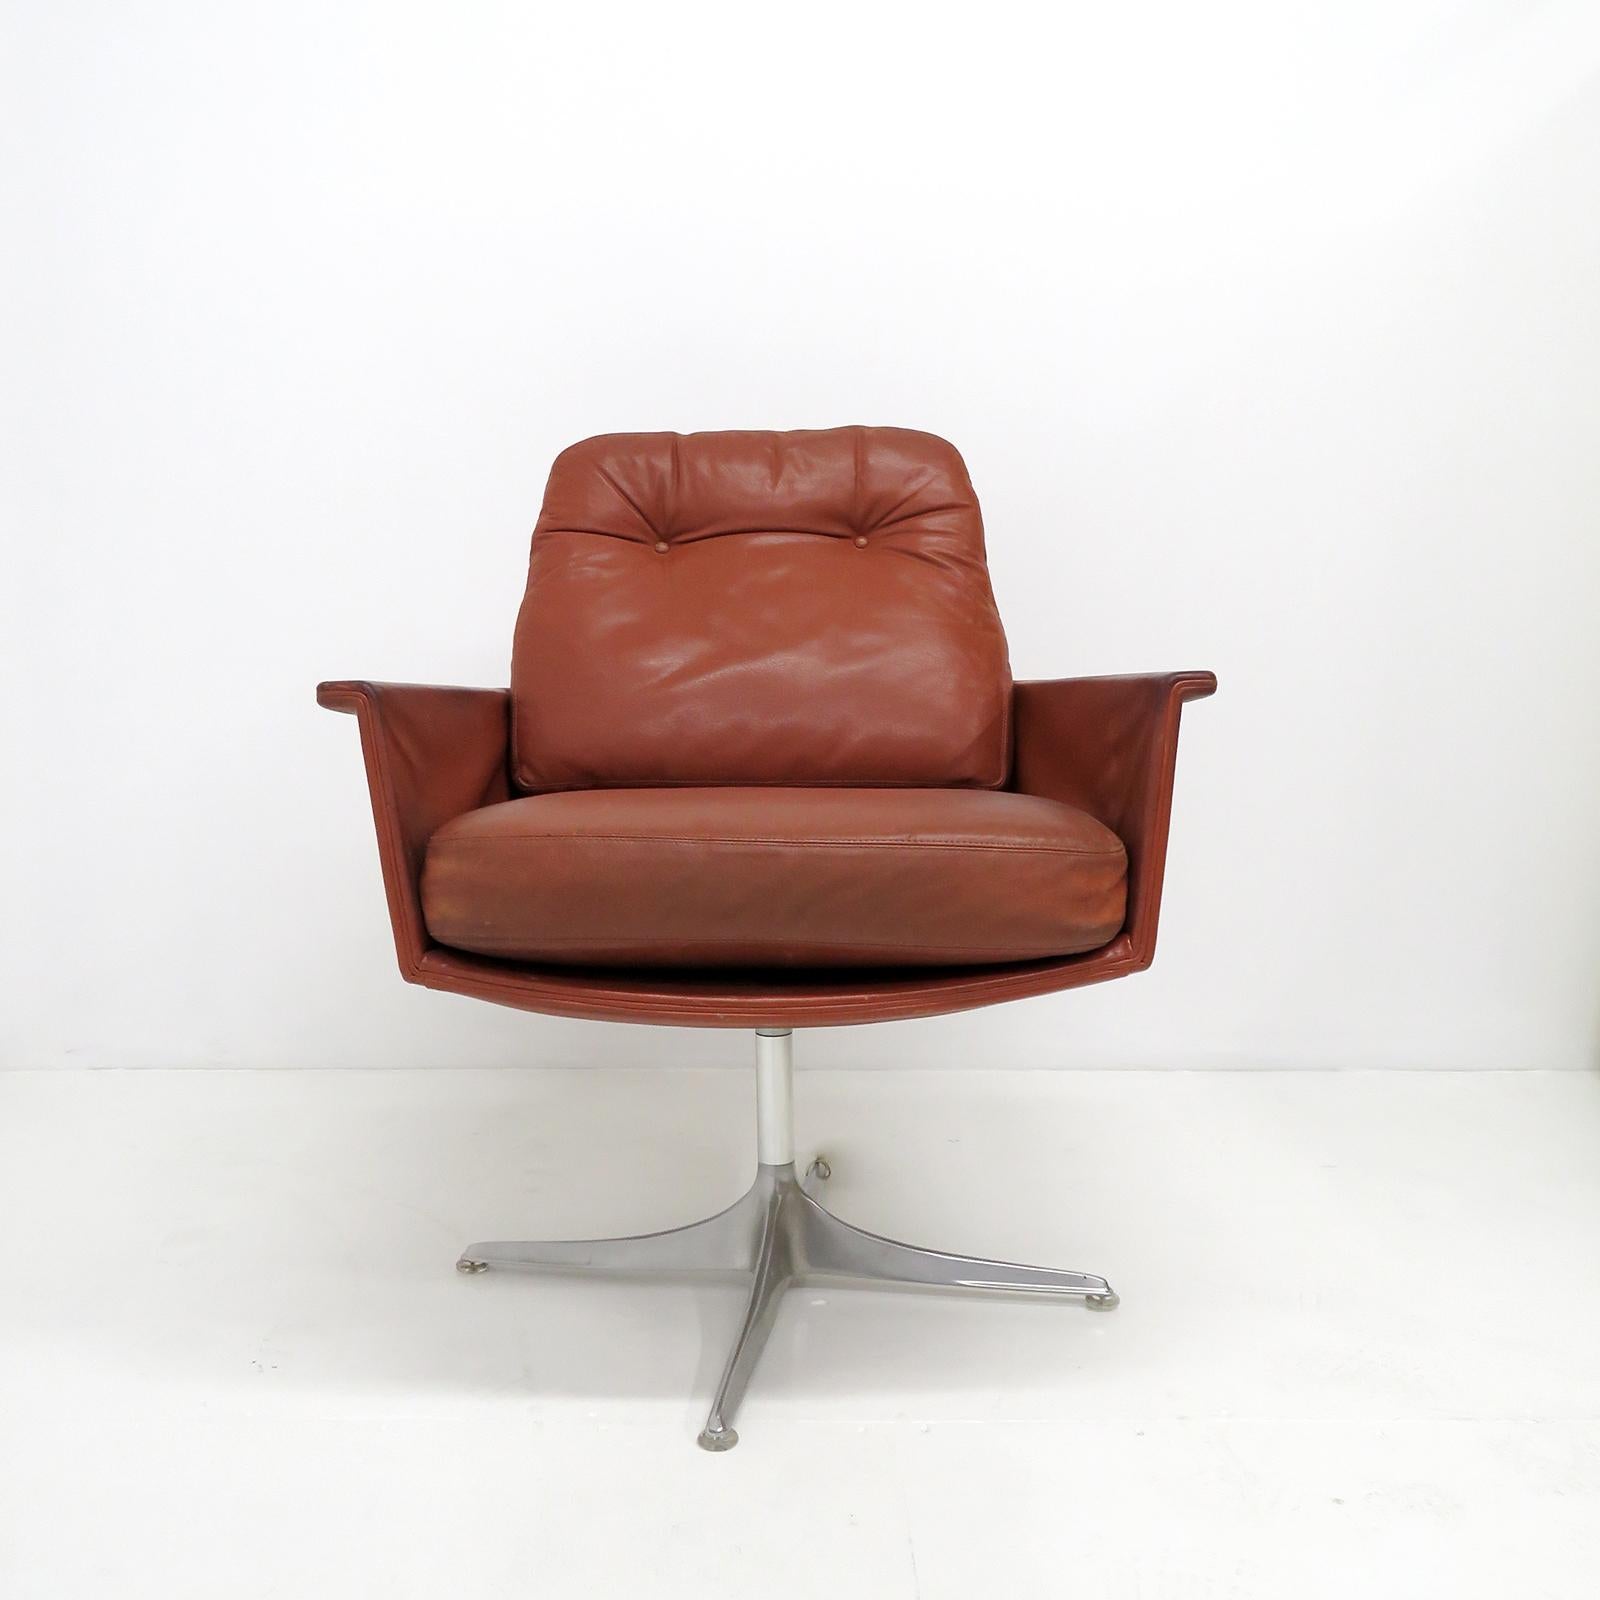 wonderful pair of Sedia lounge chairs by Horst Brüning for Kill International, shell and loose cushions upholstered in leather, outfitted with a swivel frame with a four-star aluminium base. Designed in 1967 / 1969, produced at Kill International in